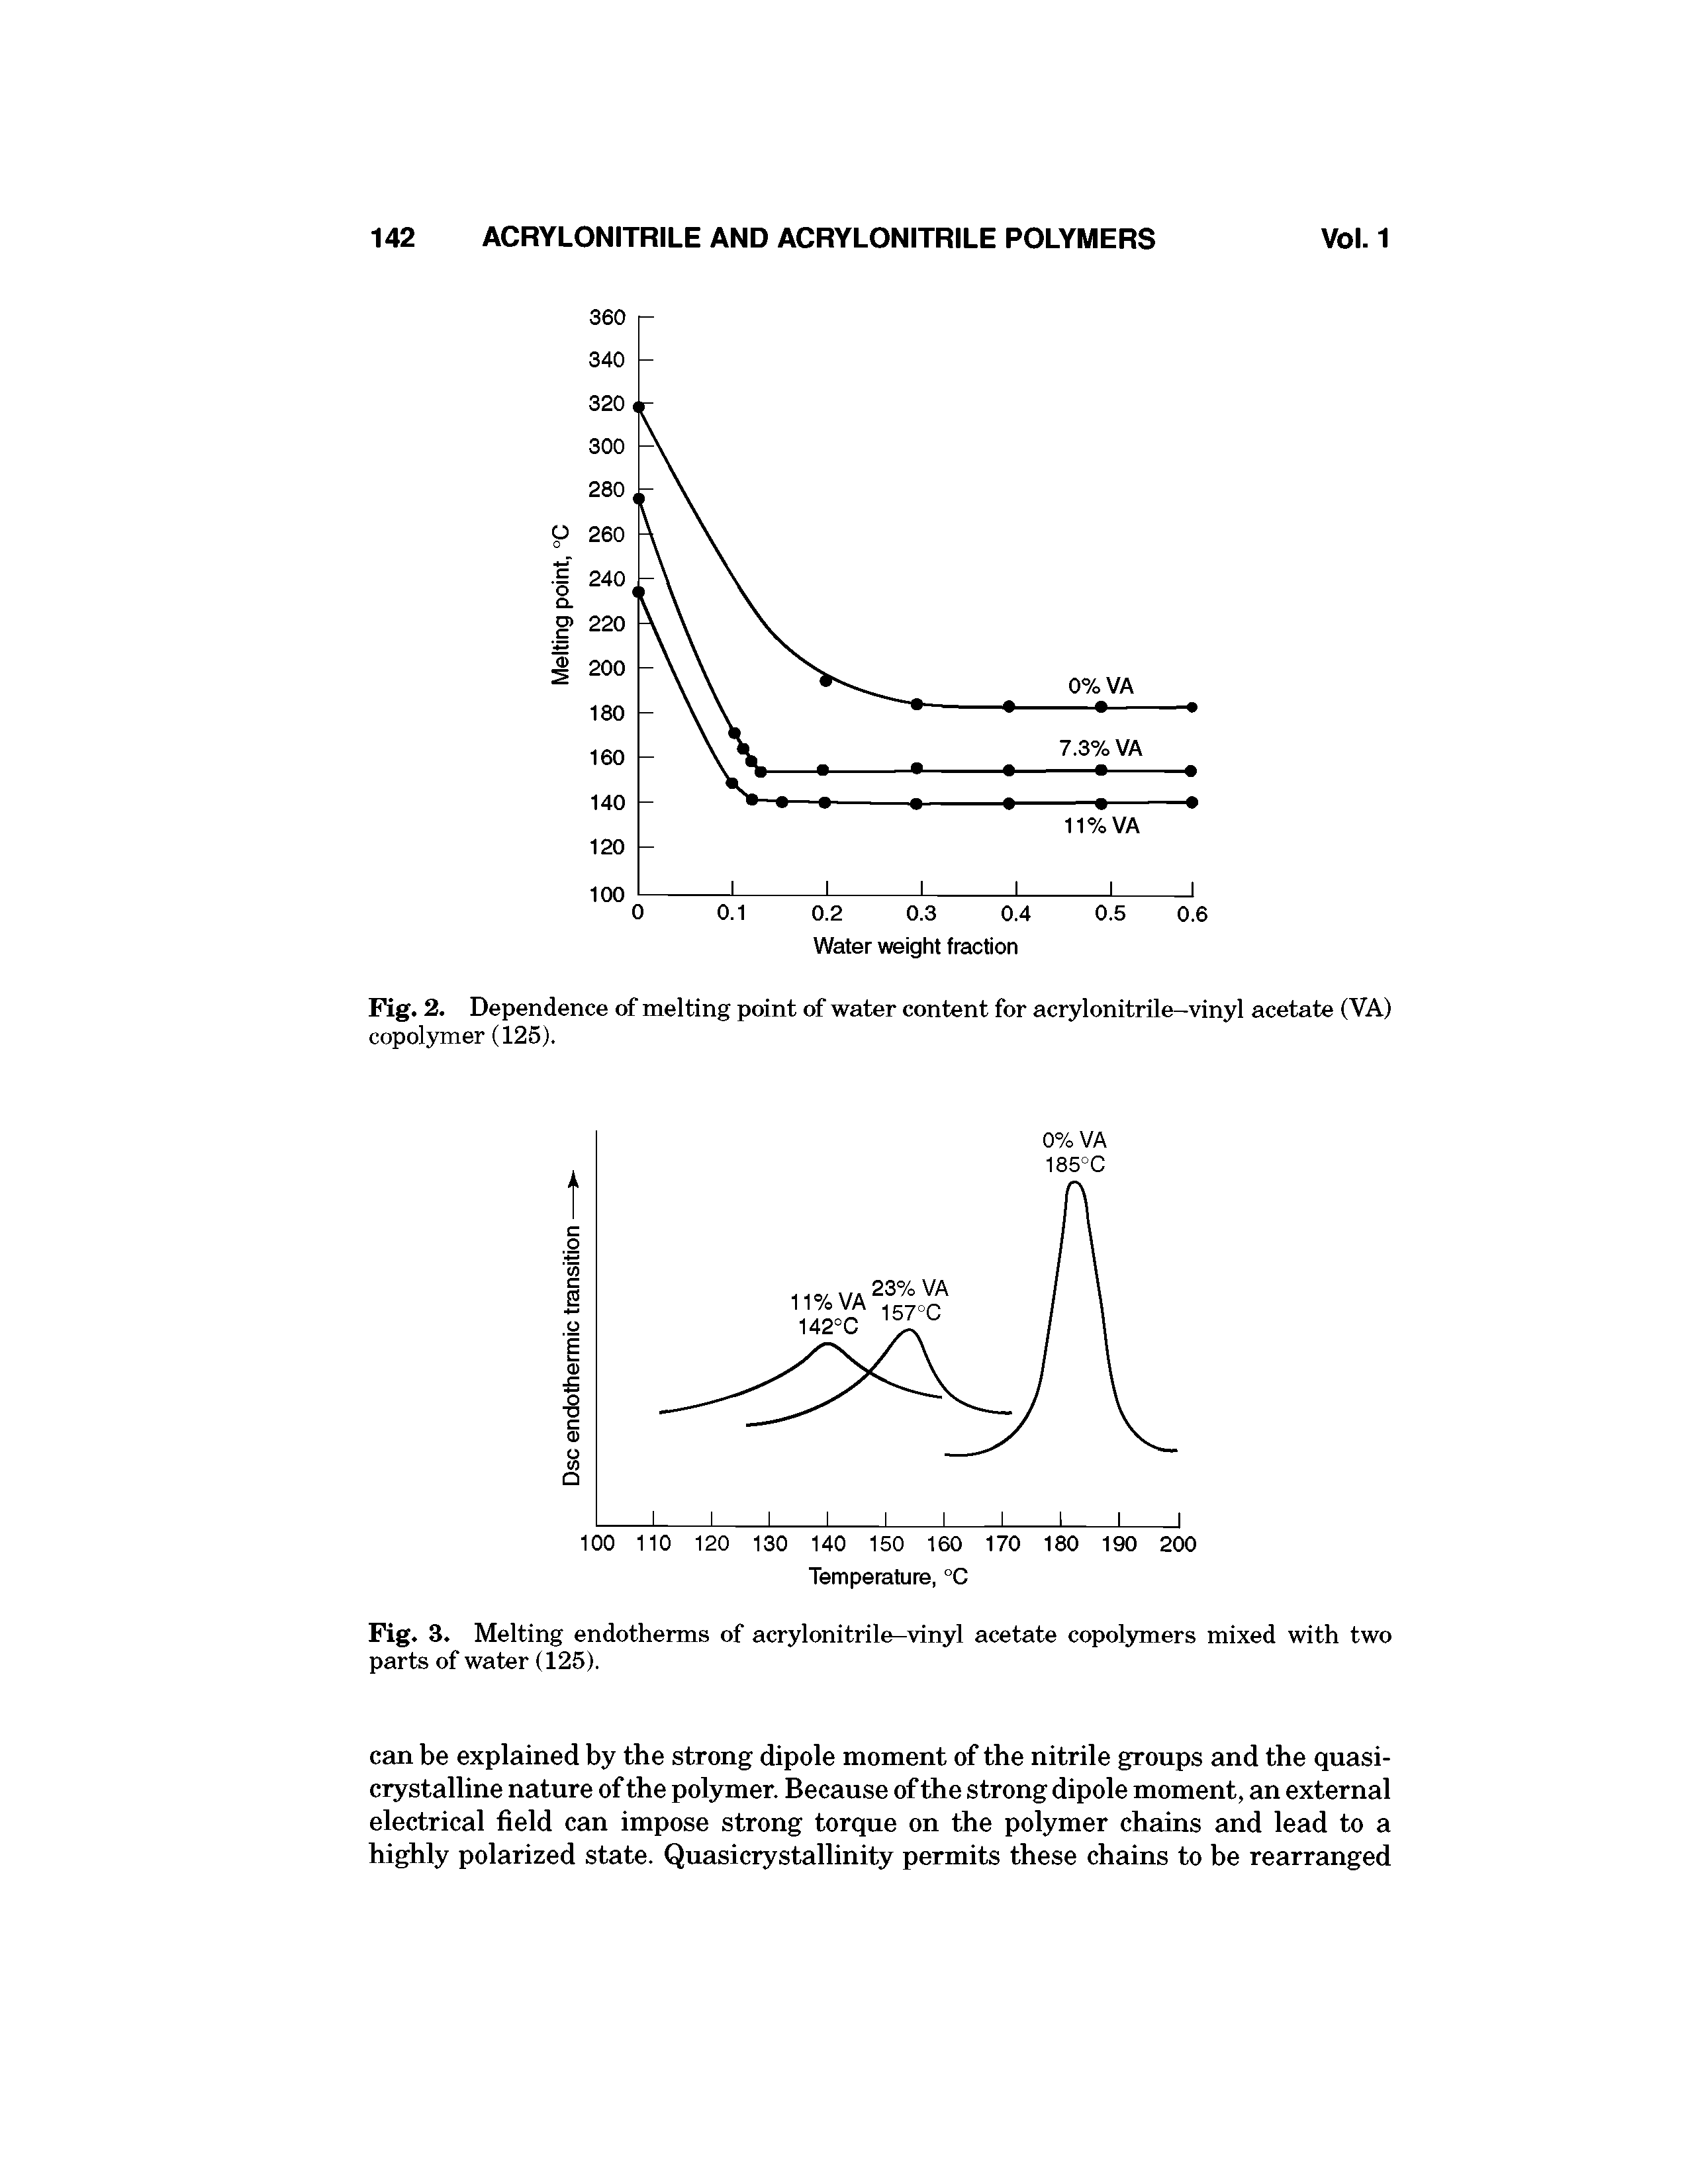 Fig. 2. Dependence of melting point of water content for acrylonitrile-vinyl acetate (VA) copolymer (125).